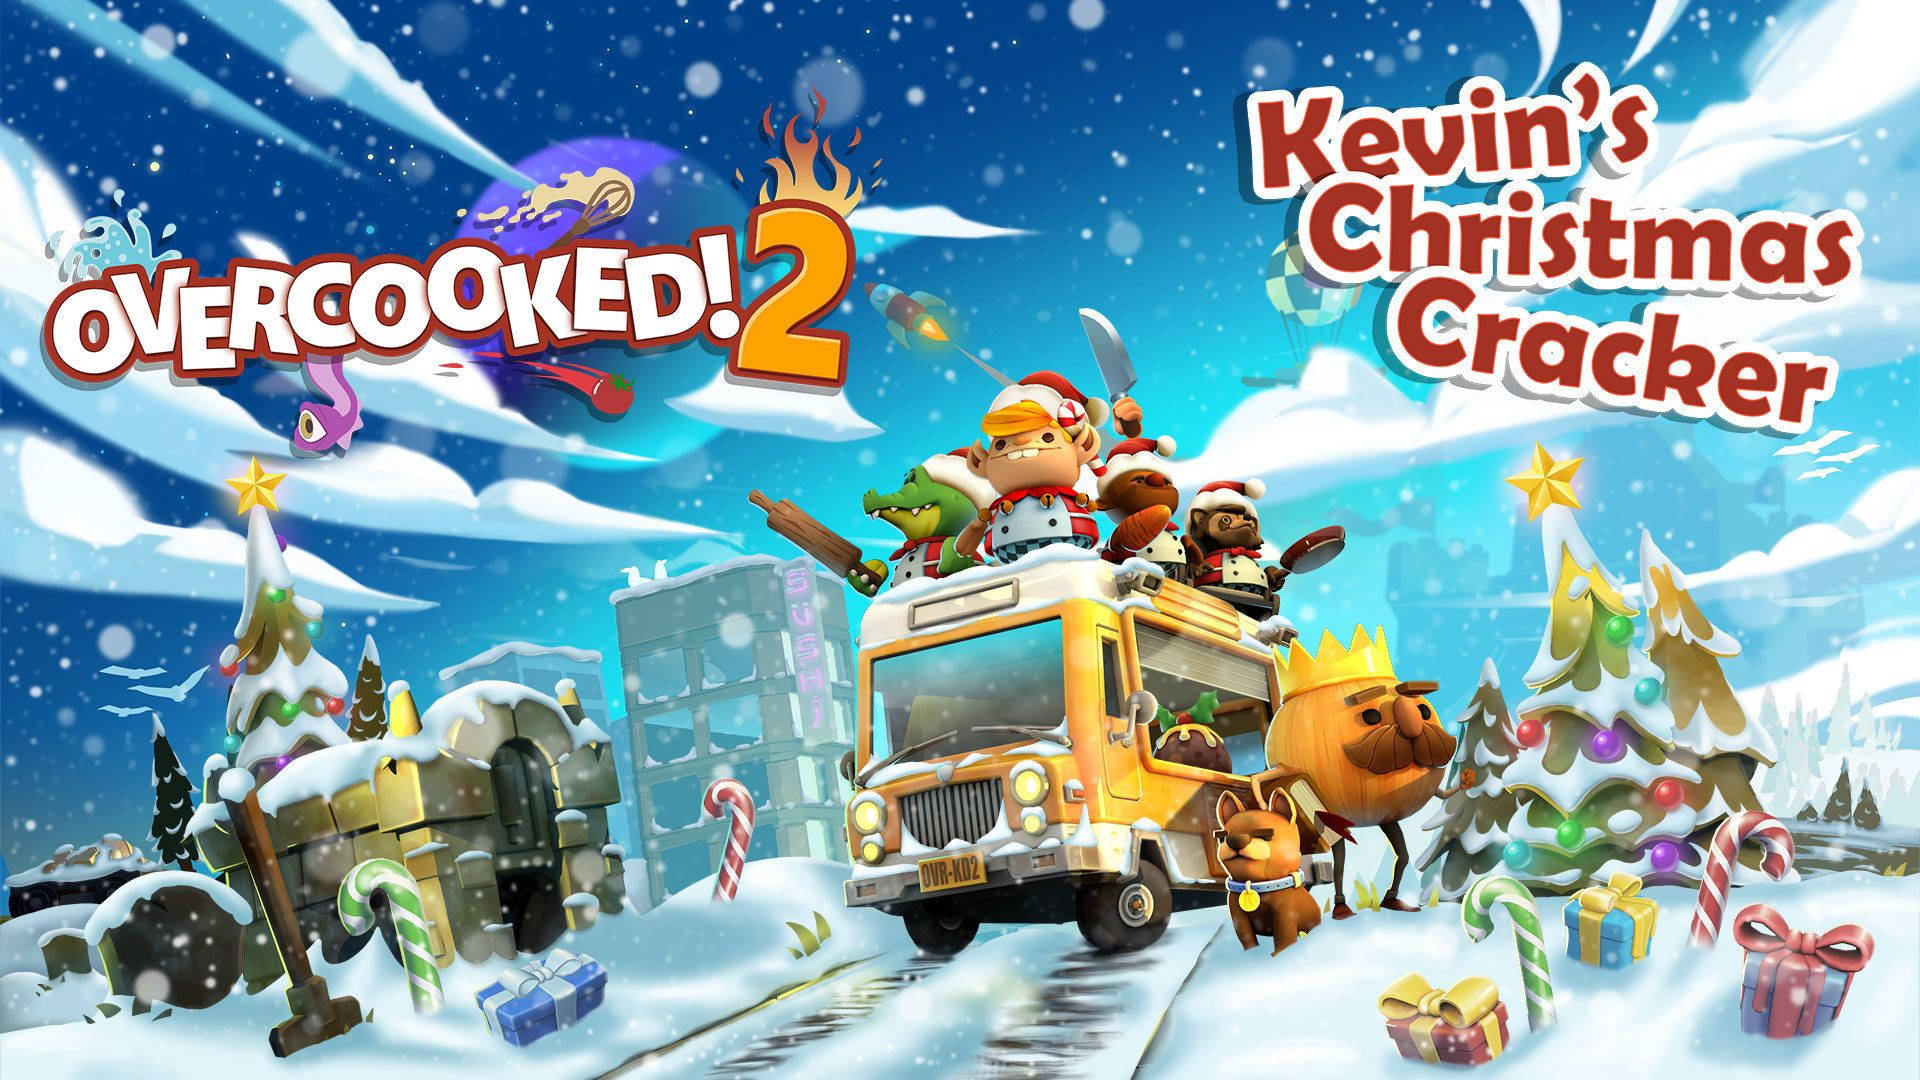 Fast-paced Culinary Adventure In Overcooked 2: Kevin's Christmas Crackers Background